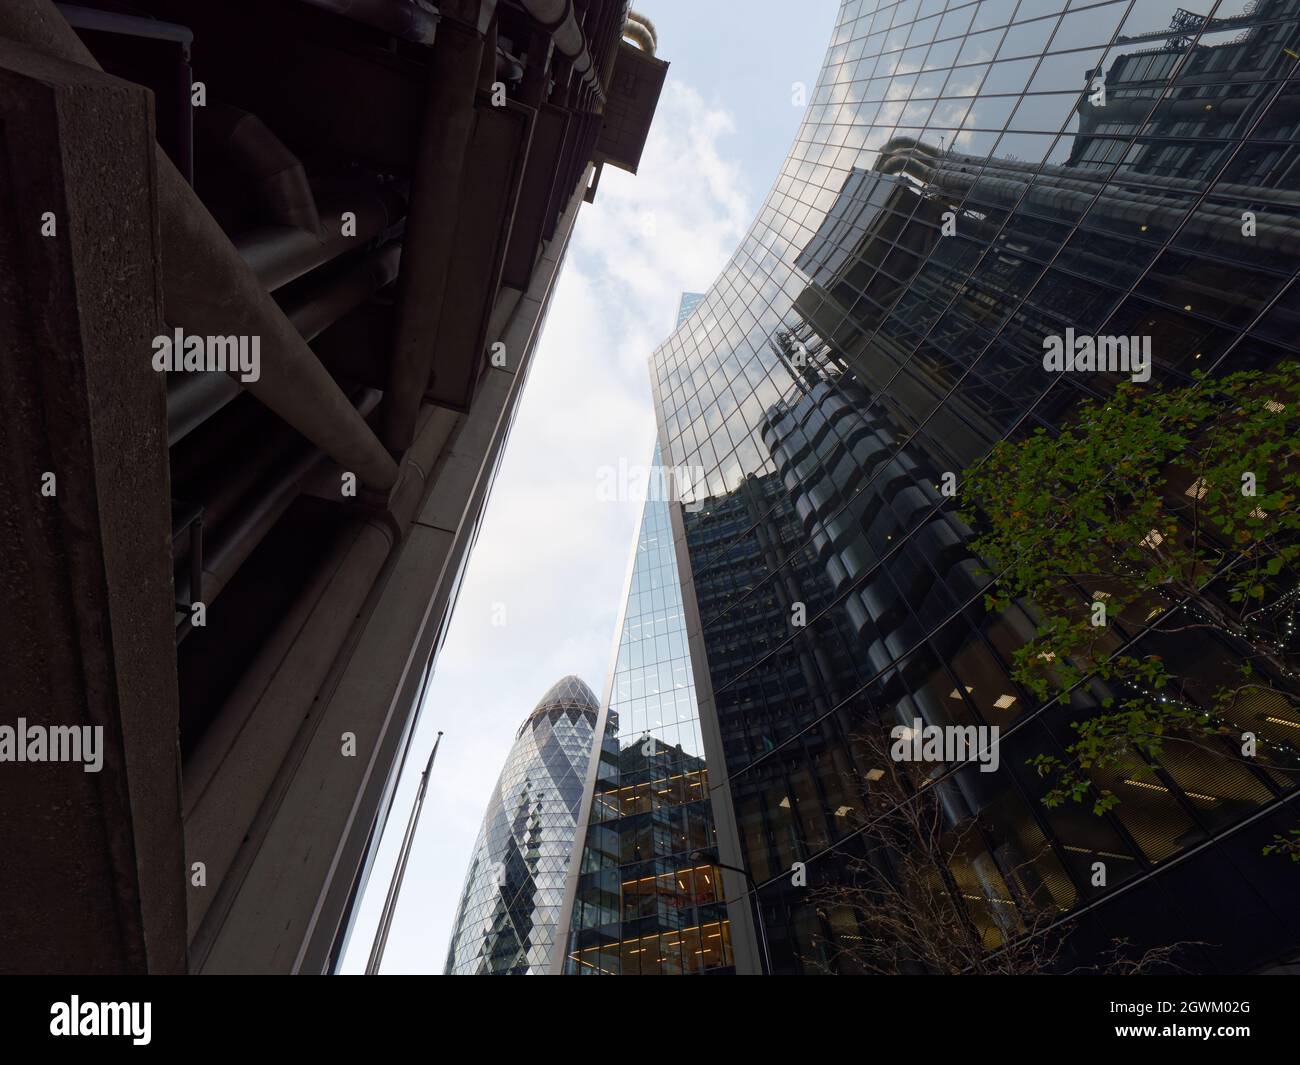 London, Greater London, England, September 21 2021: 30 St Marys Axe skyscraper aka The Gherkin plus other modern buildings as seen from Lime Street. Stock Photo